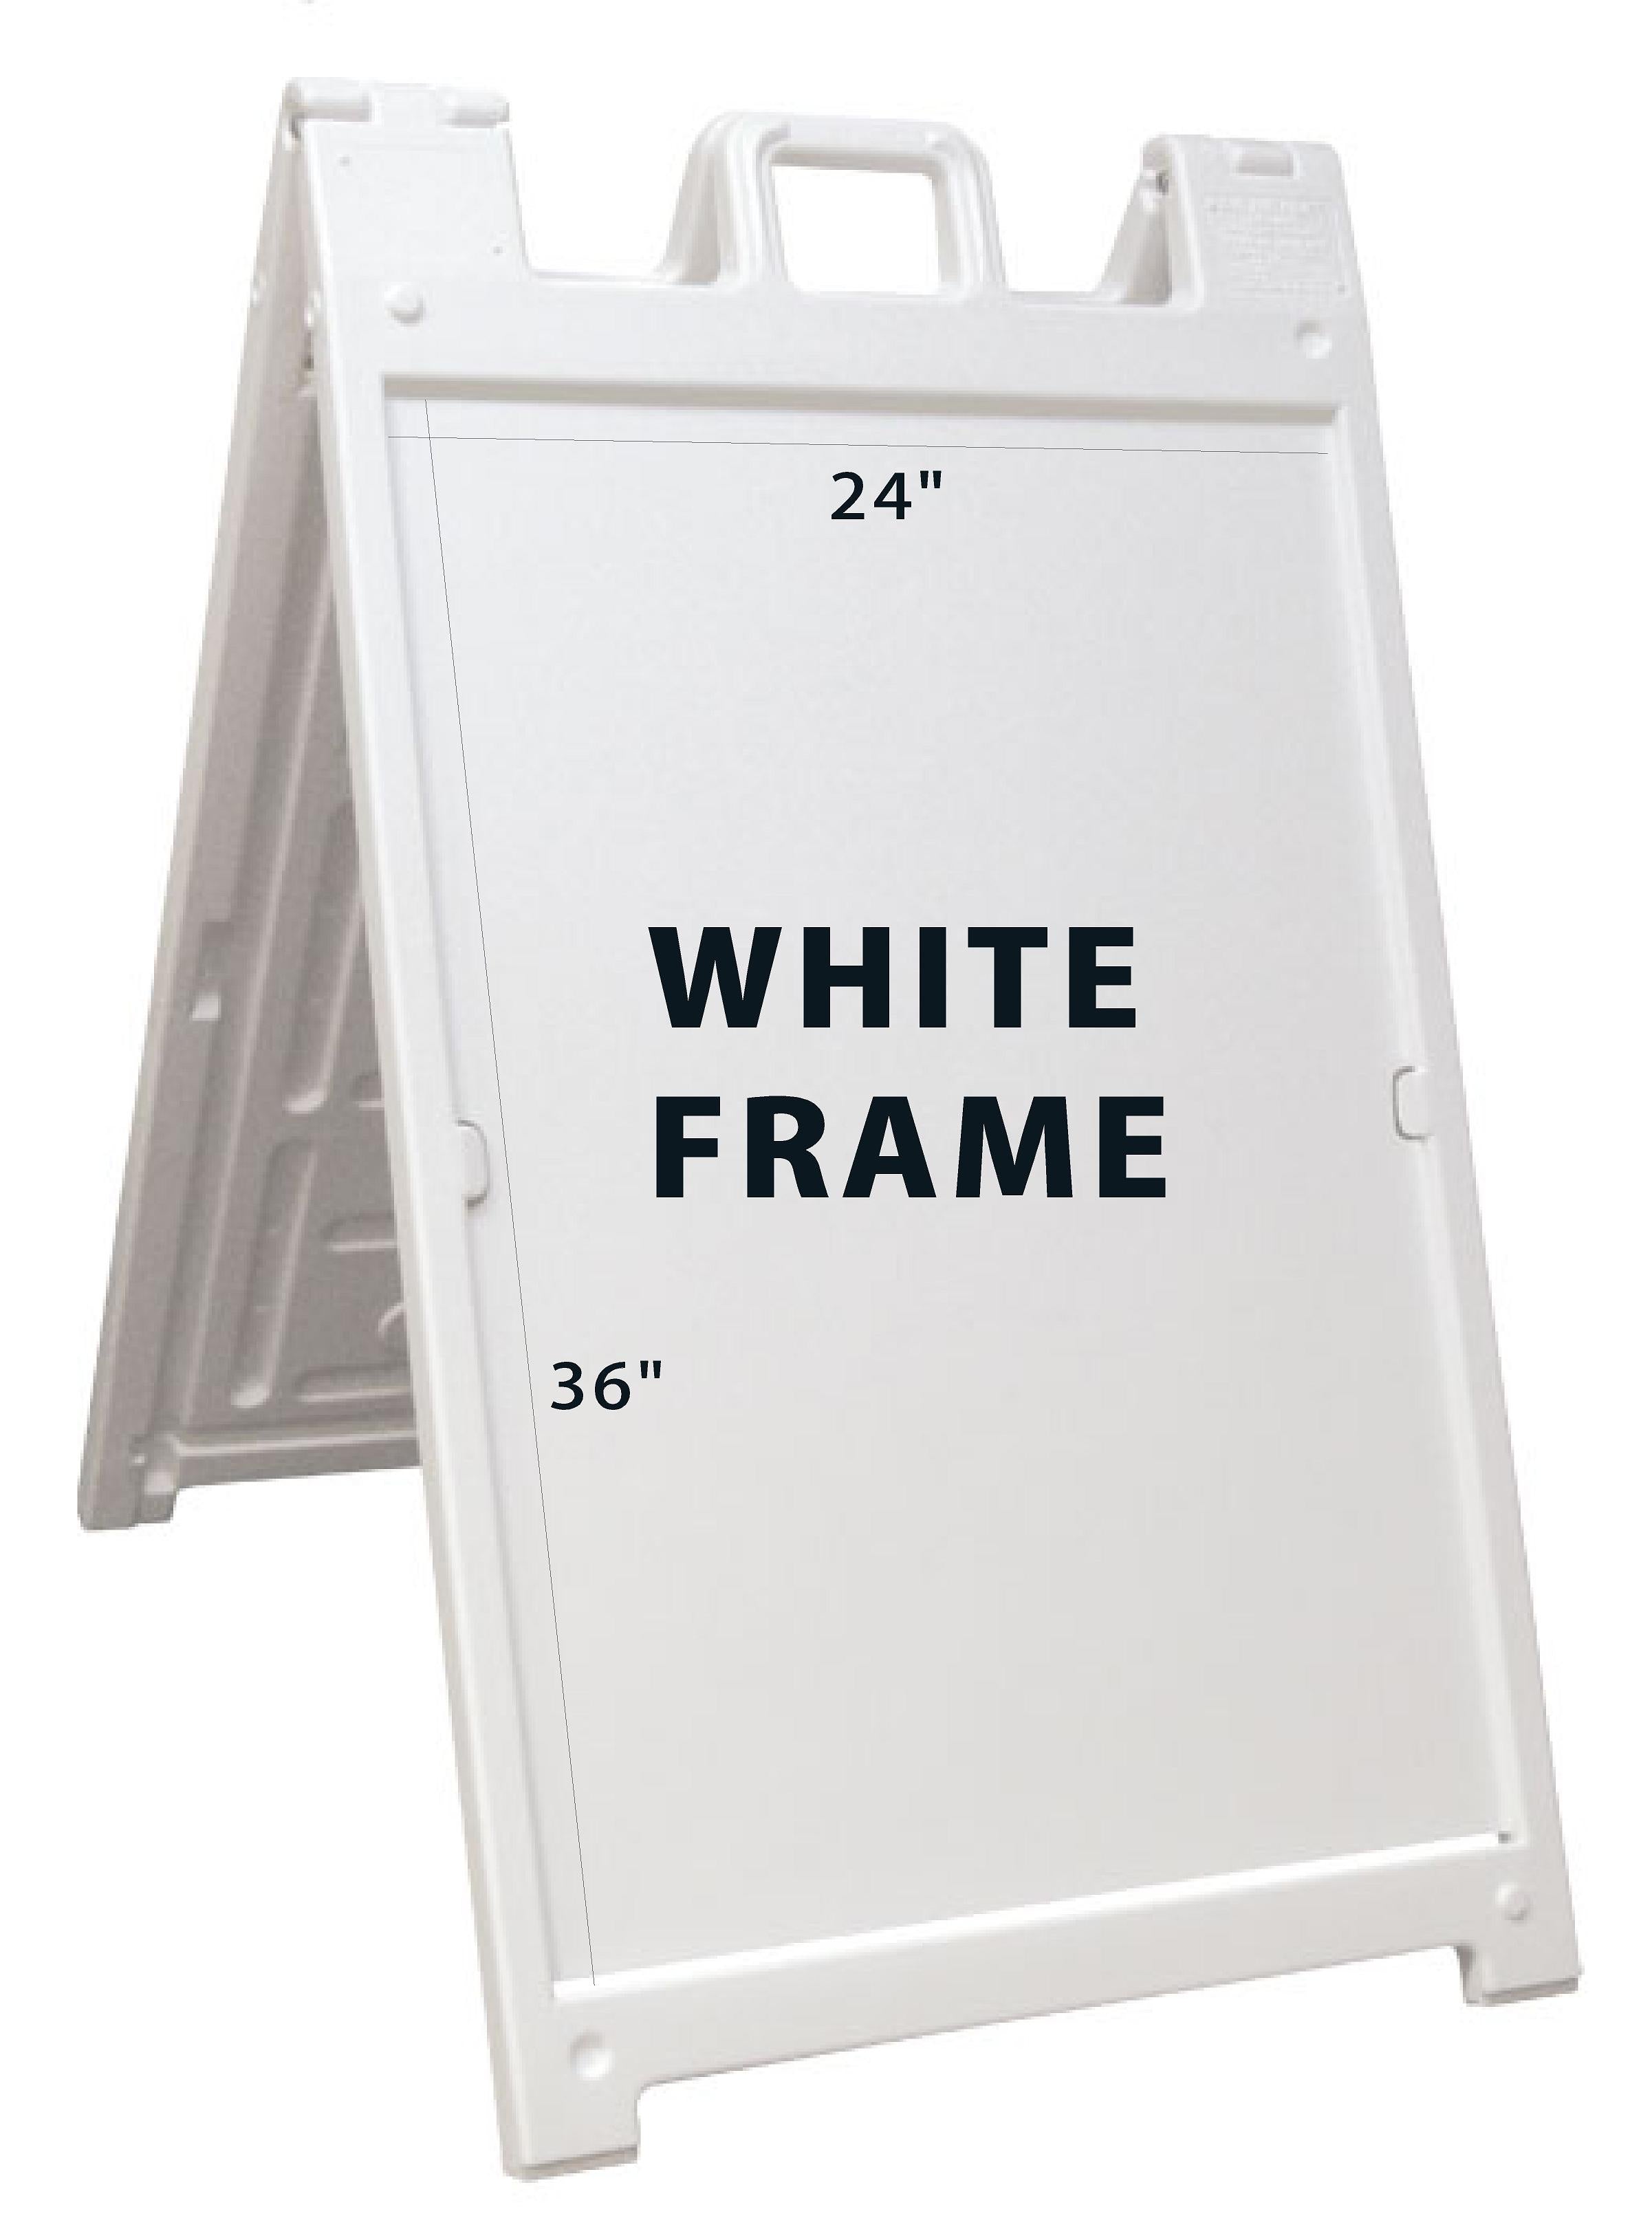 Double-sided A-frame sign for retail store promotions